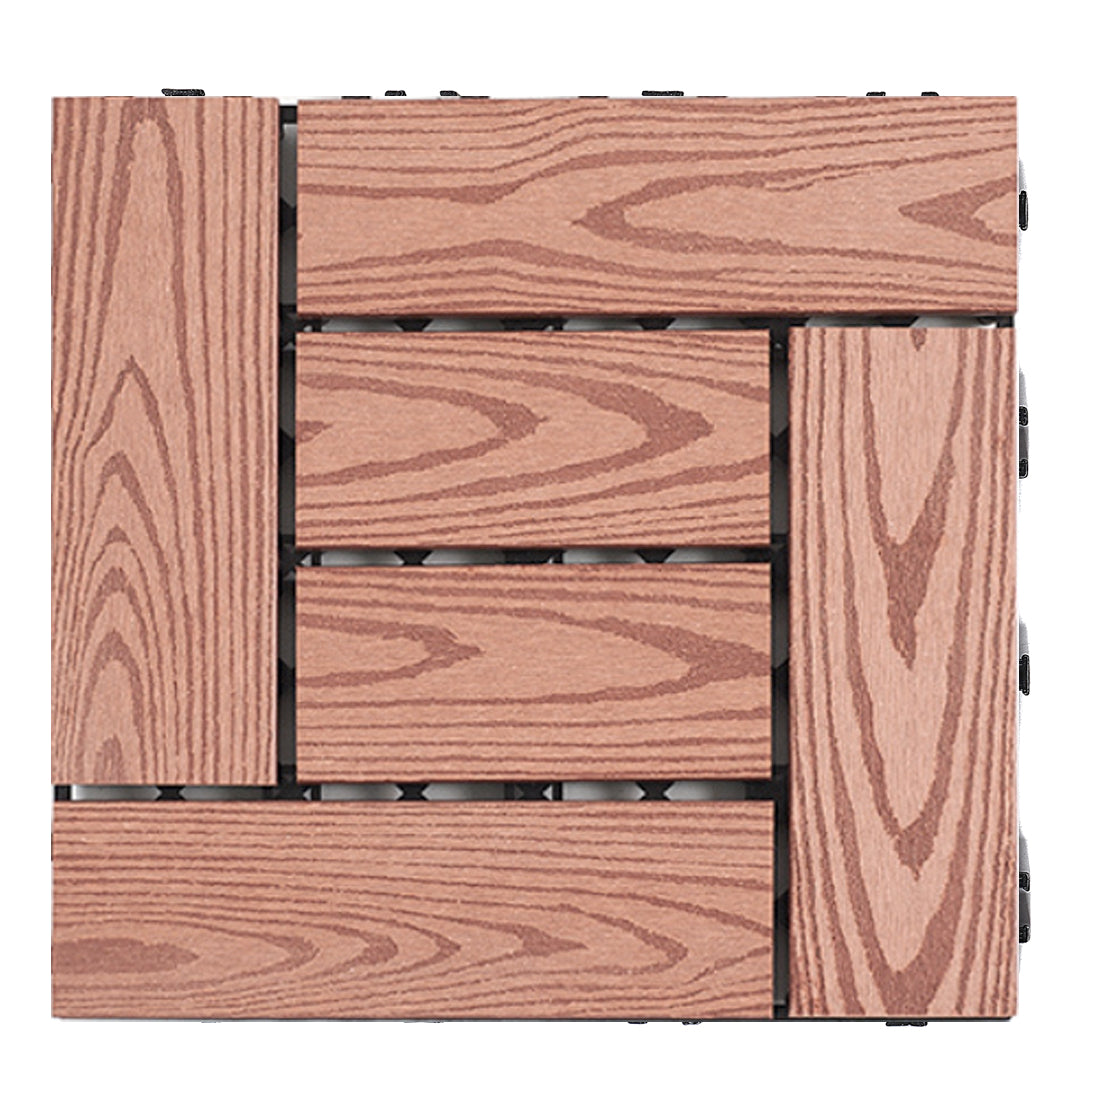 12''x12'' Wood Composite Deck Tiles -Circle Red Wood (Pack of 10)